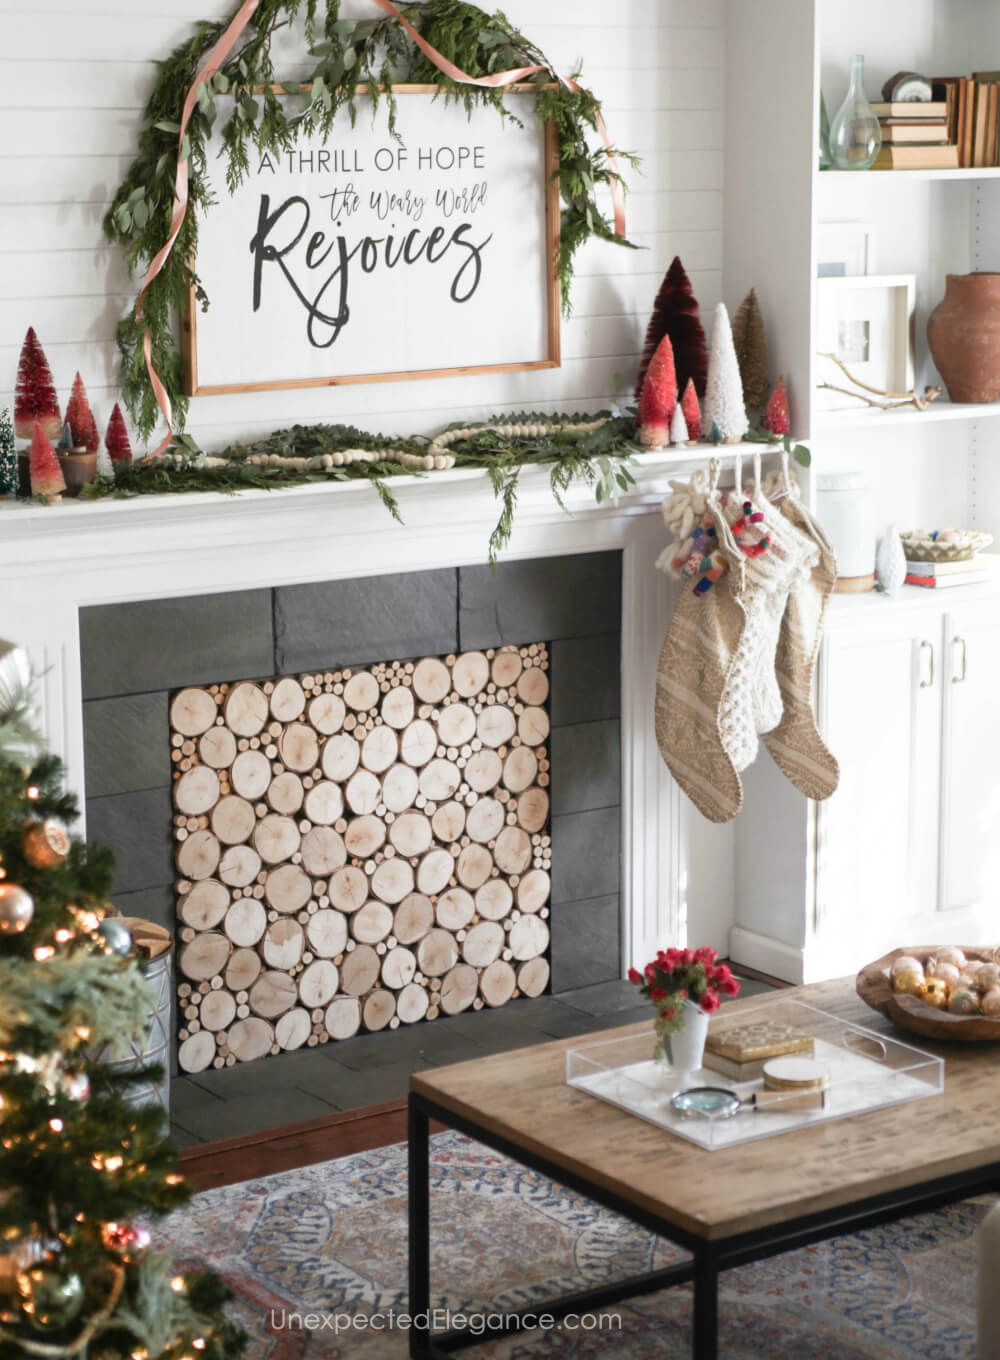 Get some easy ideas to make Christmas a little less stressful this year.